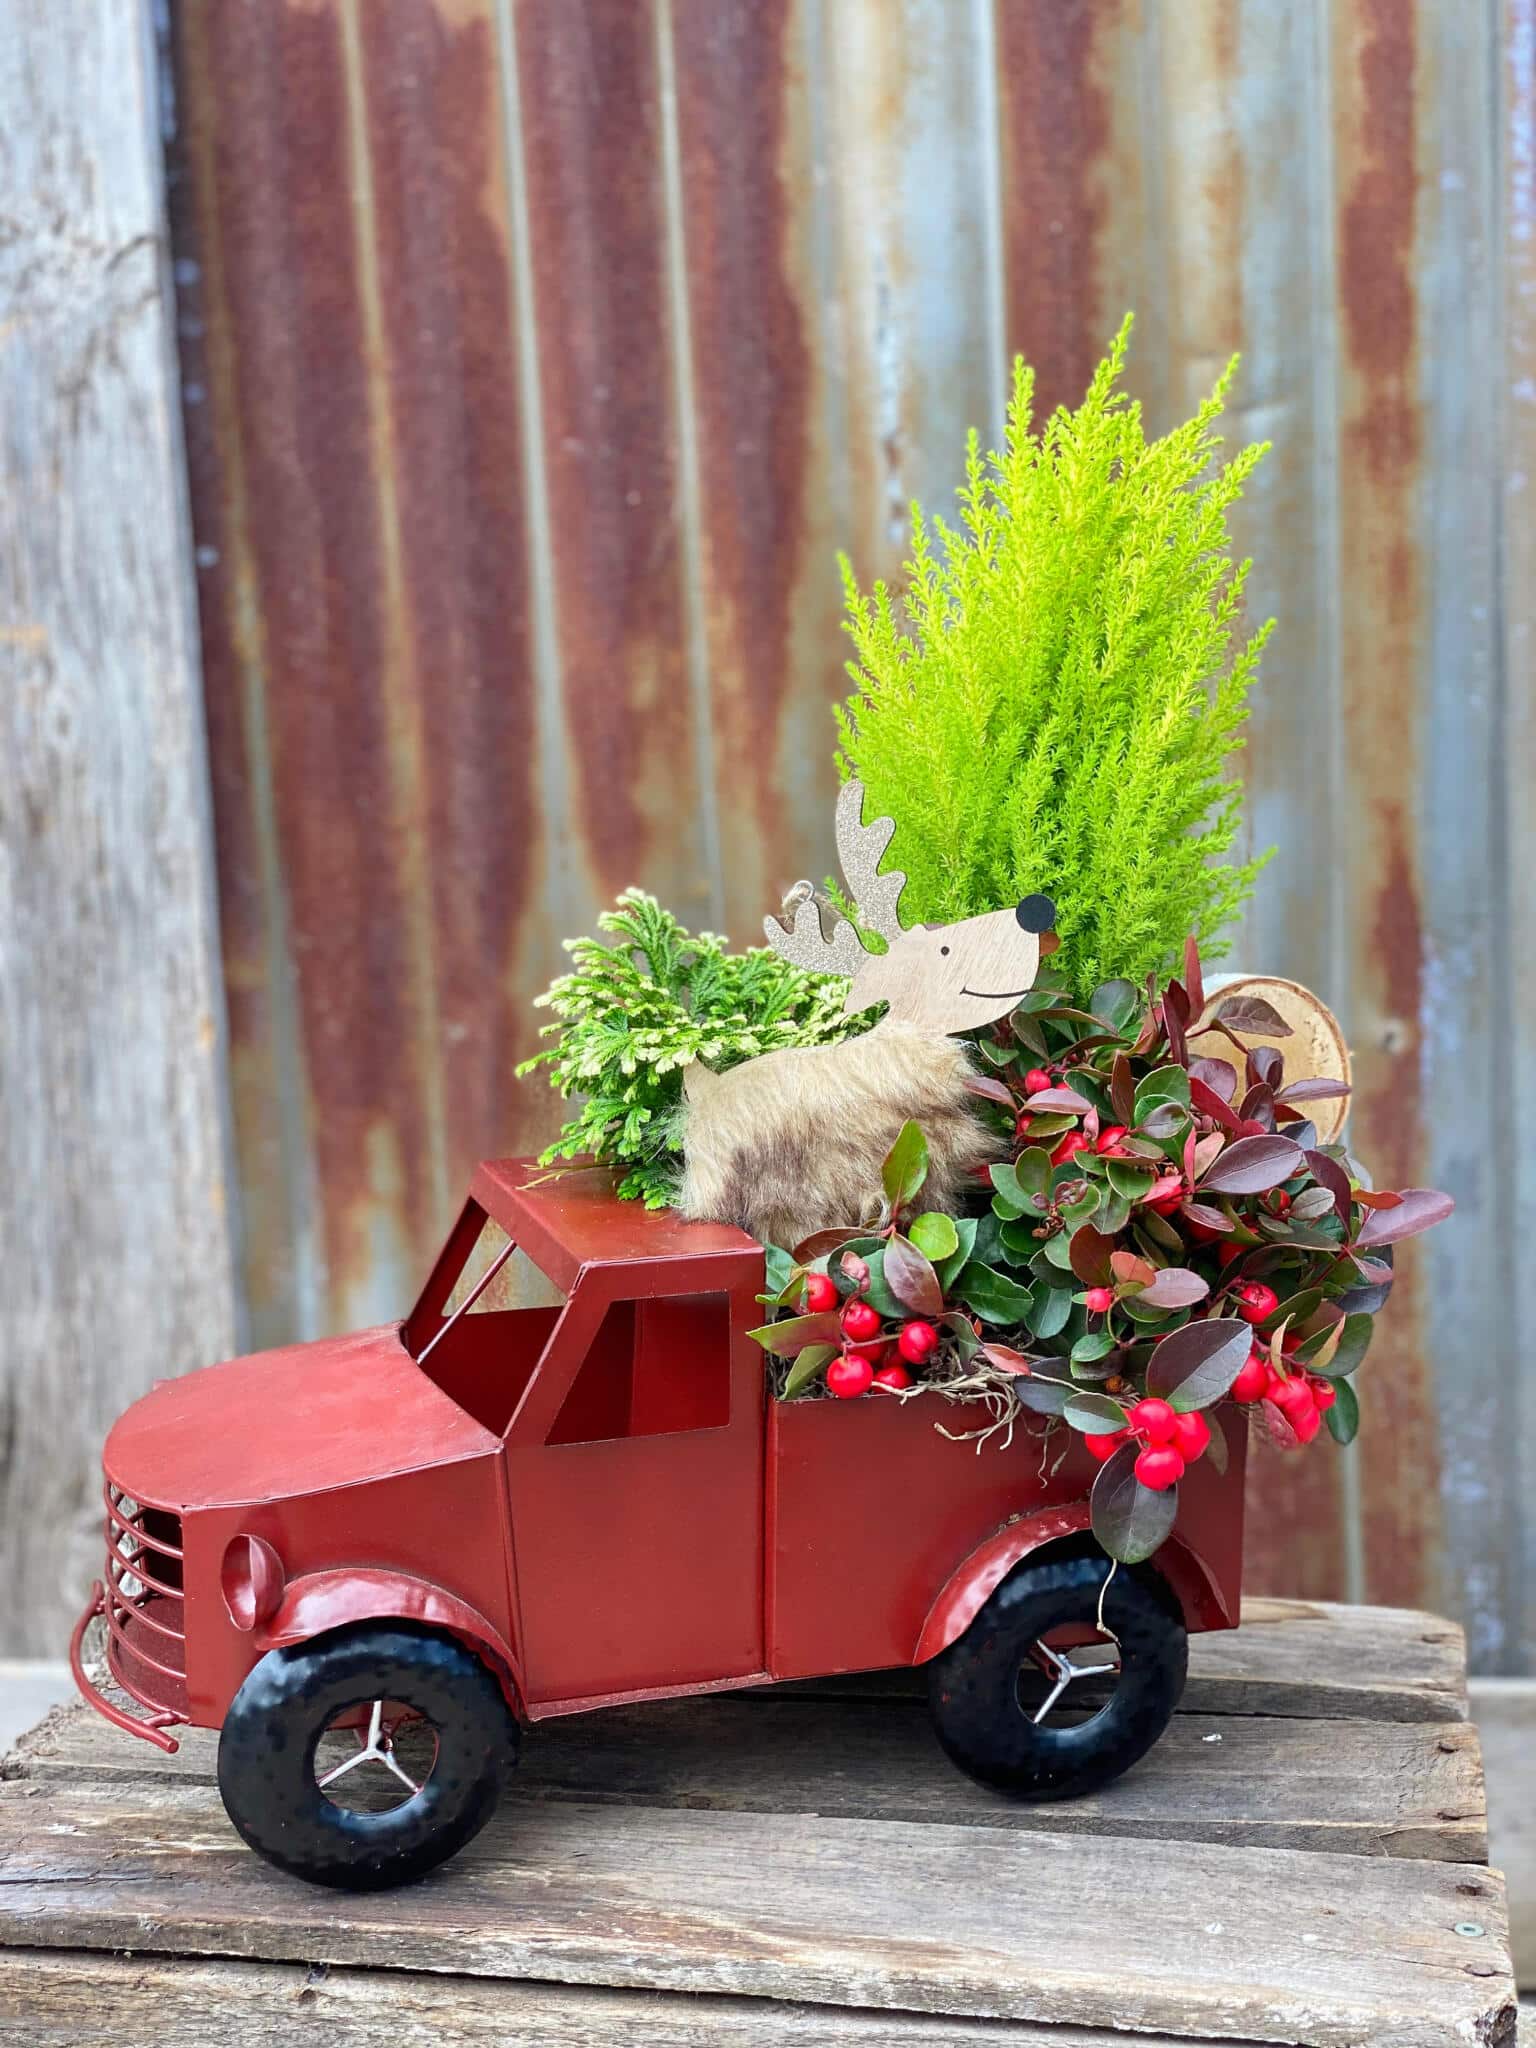 The Watering Can | A festive planter in a red turck.